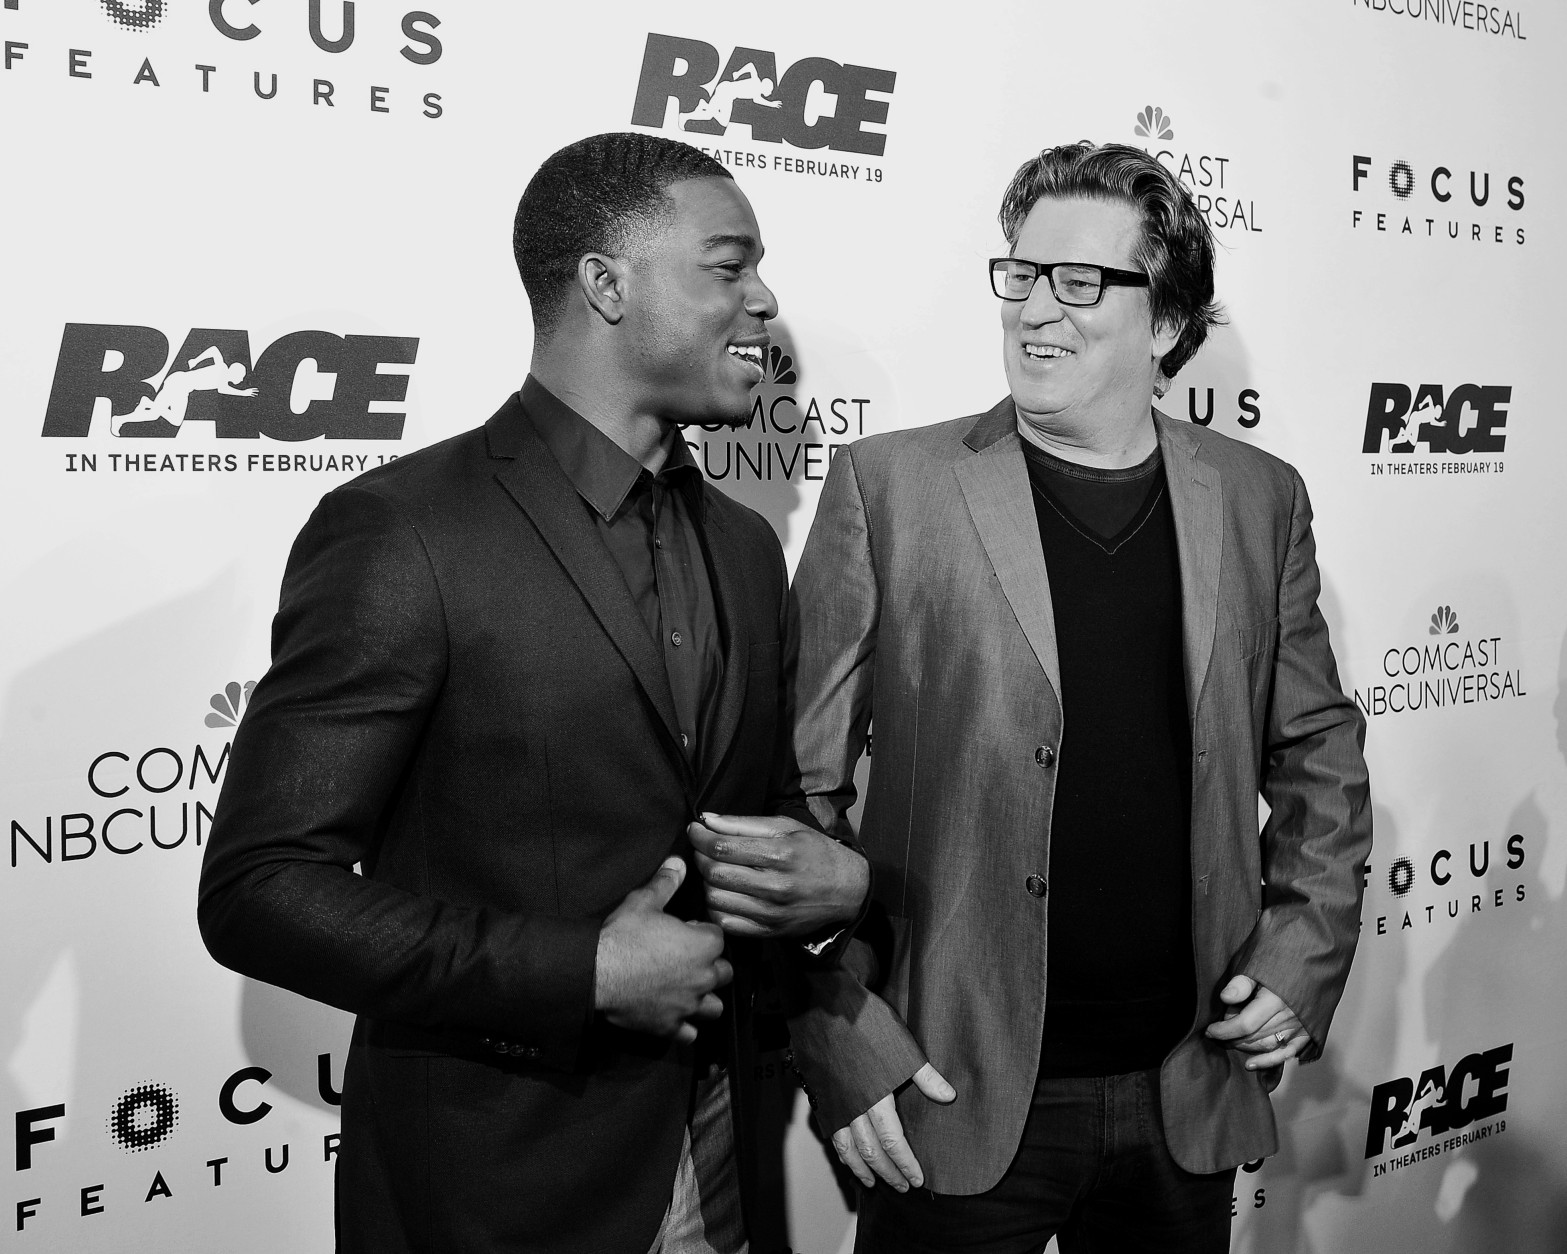 Actor Stephan James is pictured here with director Stephen Hopkins at the Feb. 3, 2016 screening of "Race." (Courtesy Shannon Finney, www.shannonfinneyphotography.com)